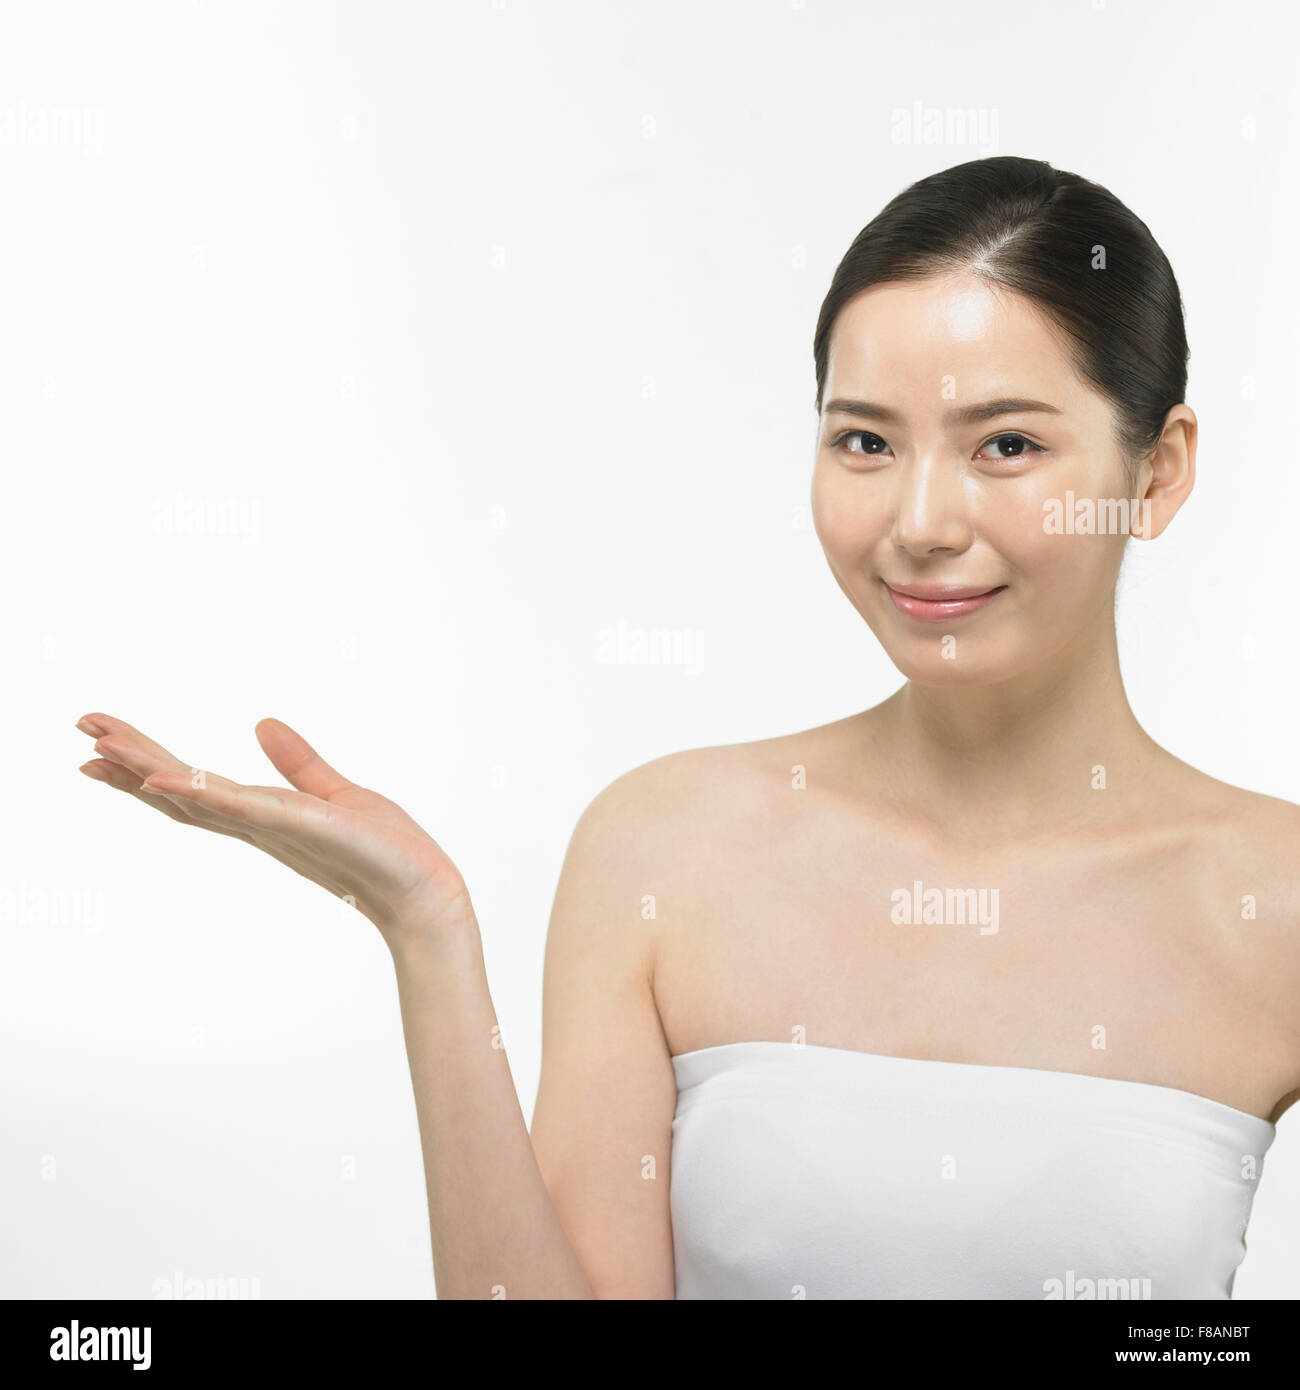 Portrait of smiling Korean woman holding hand staring at front Stock Photo